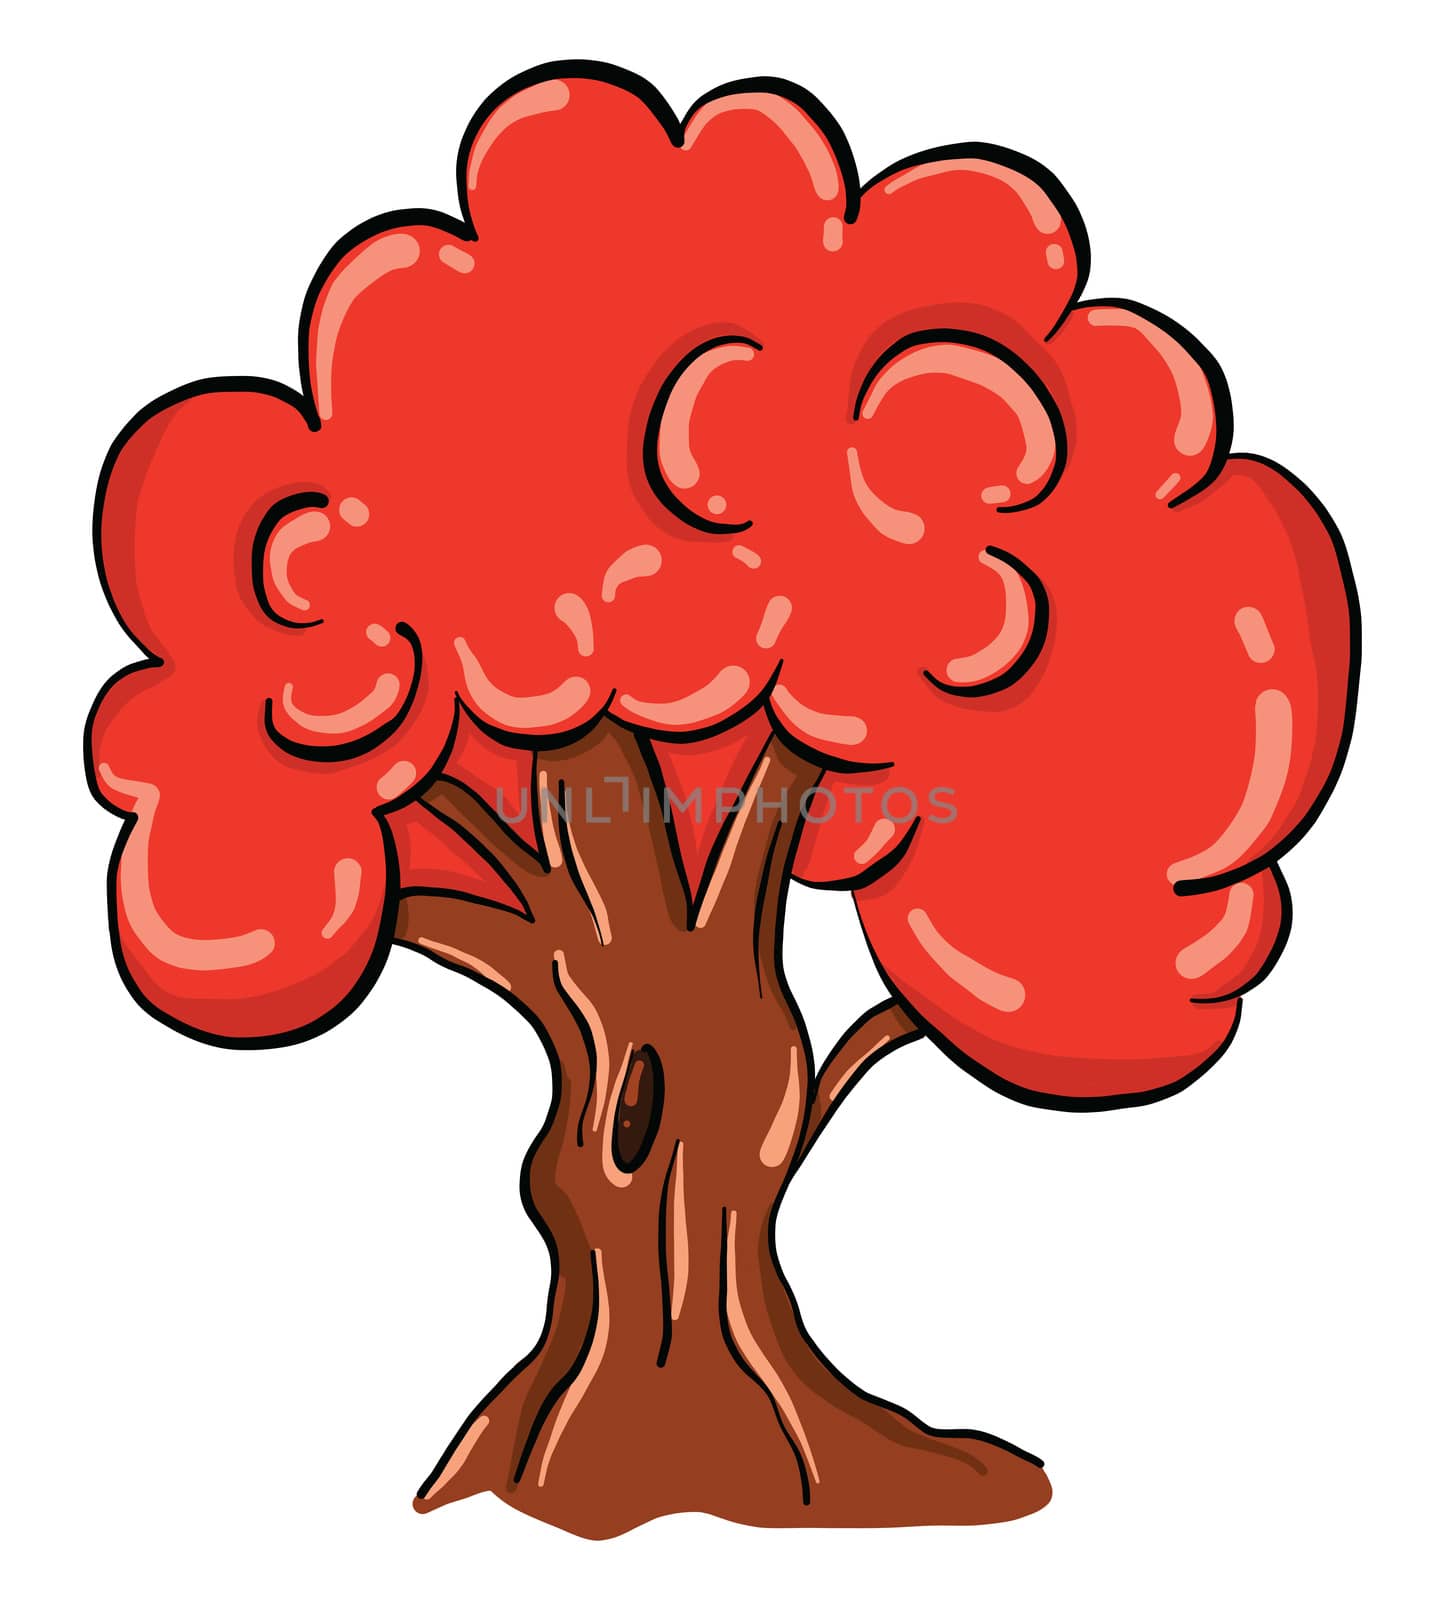 Red tree , illustration, vector on white background